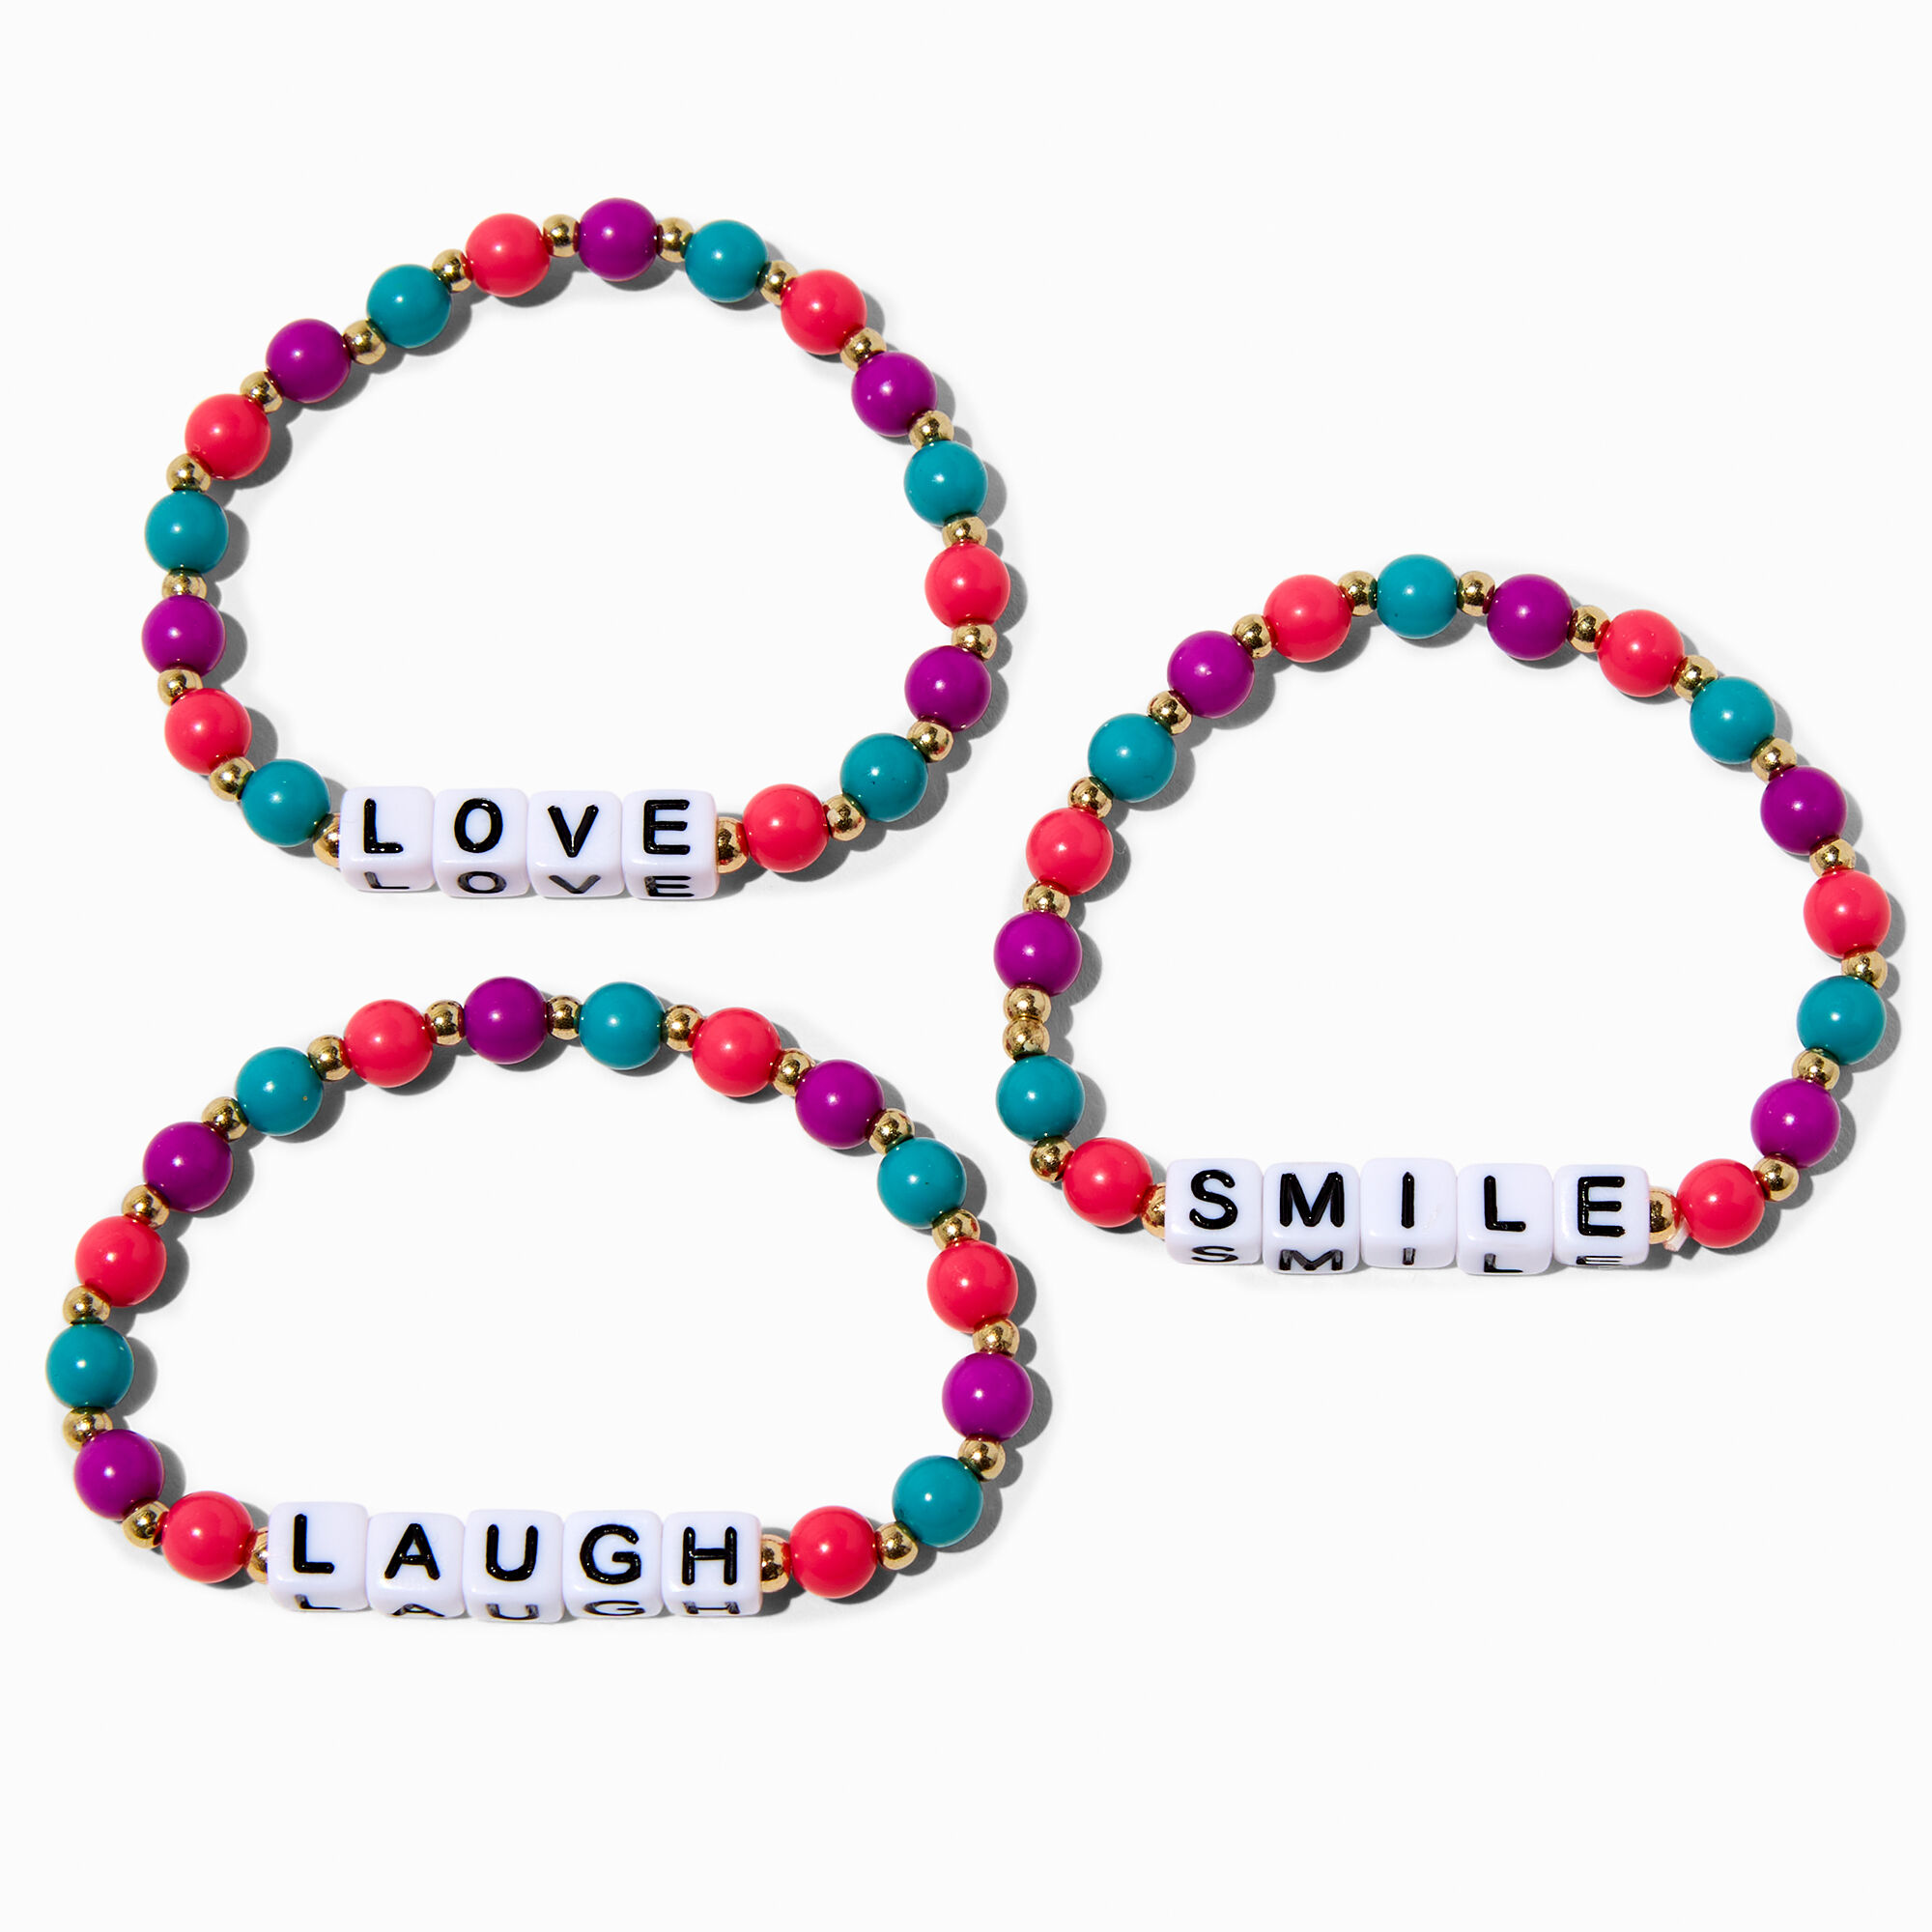 View Claires Club Jeweled Bead Word Stretch Bracelets 3 Pack information